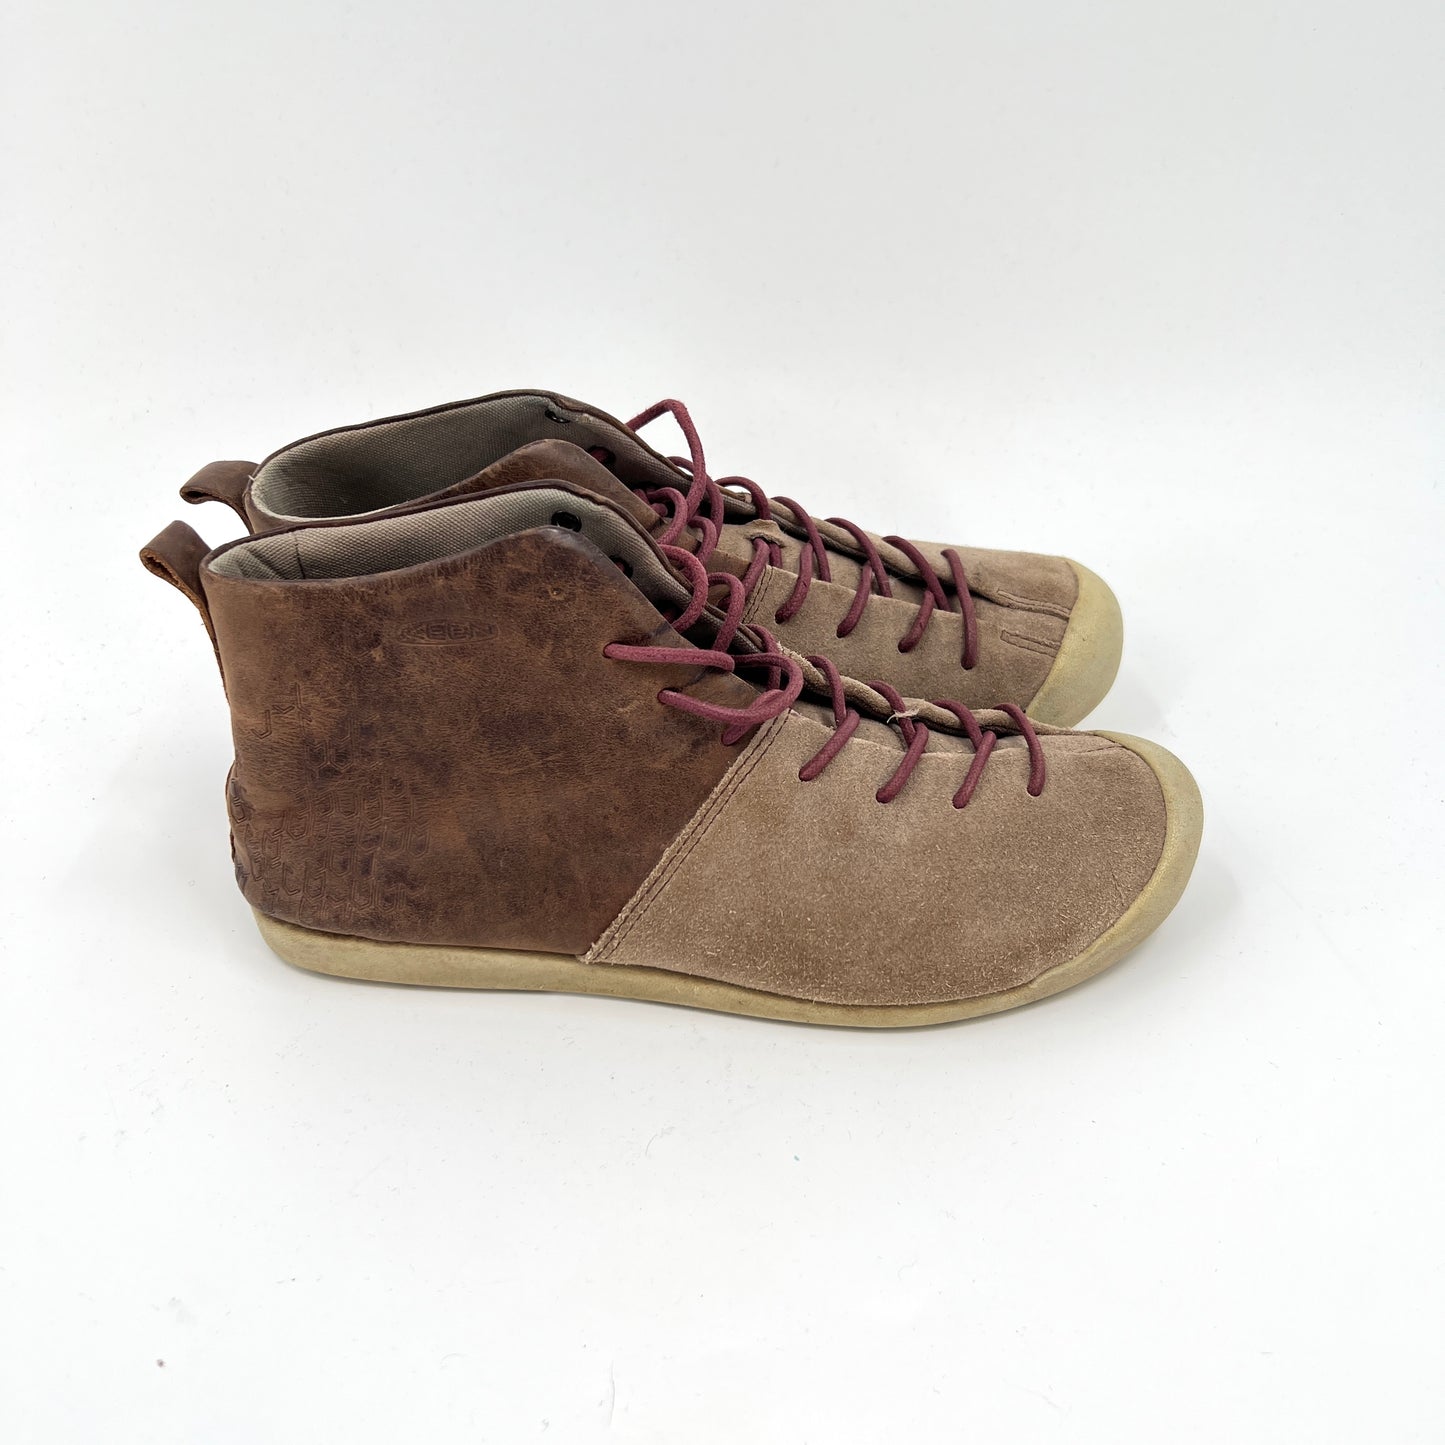 SOLD. Keen Leather Casual High Top Shoes 8.5